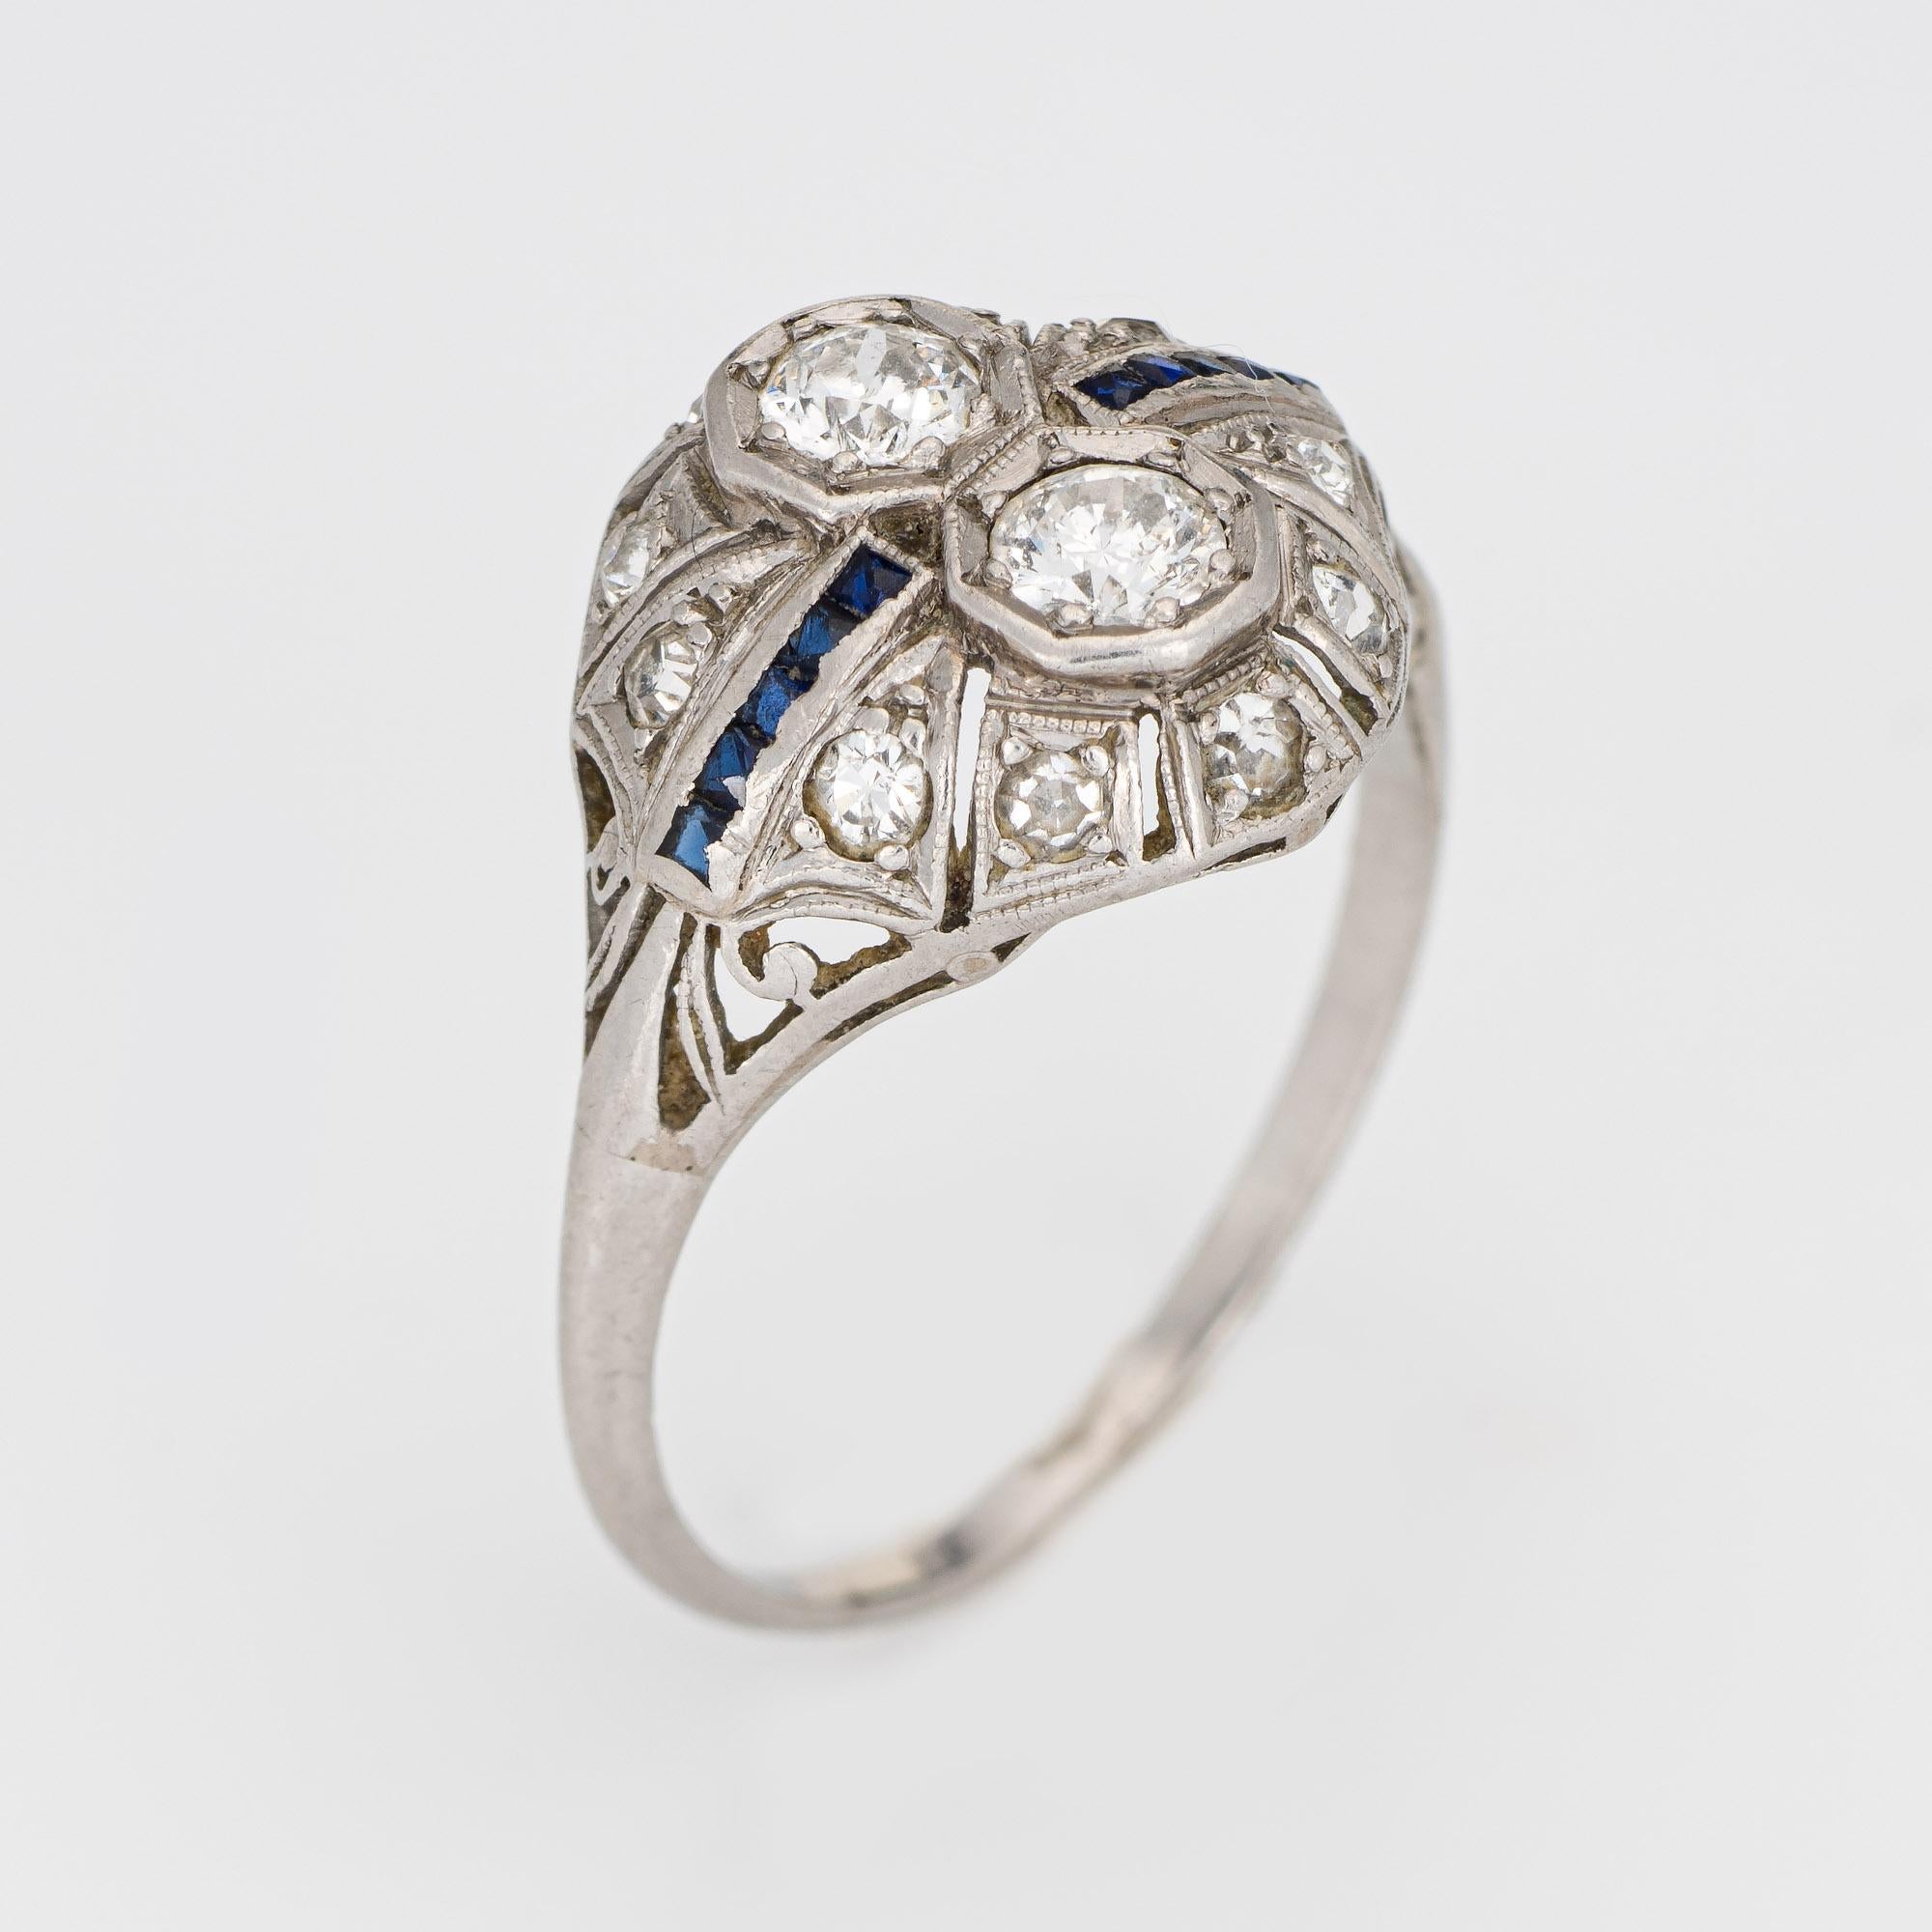 Elegant & finely detailed Art Deco era ring (circa 1920s to 1930s) crafted in 900 platinum. 

Two centrally mounted estimated 0.25 carat old European cut diamonds are accented with a further 10 estimated 0.01 carat old single cut diamonds. The total